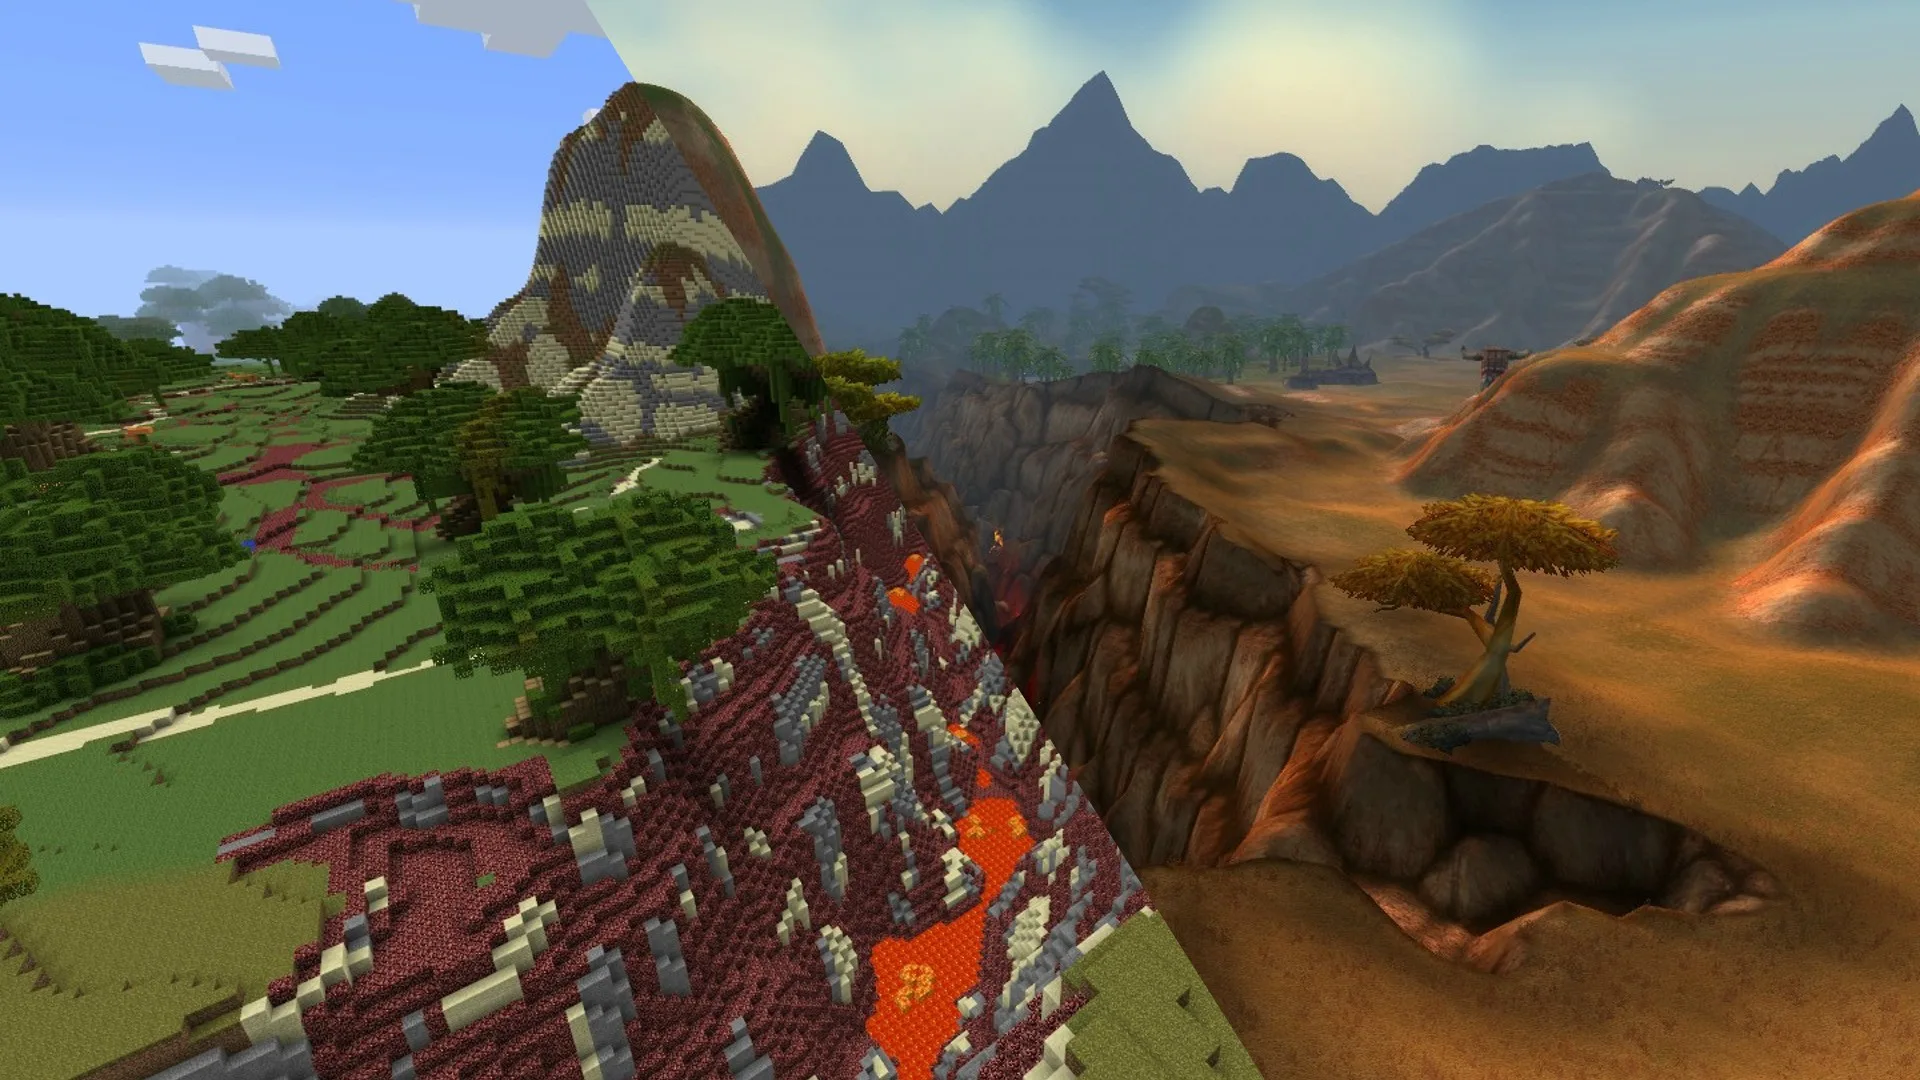 An image of a Minecraft build of Azeroth from World of Warcraft showing the mountainous landscape